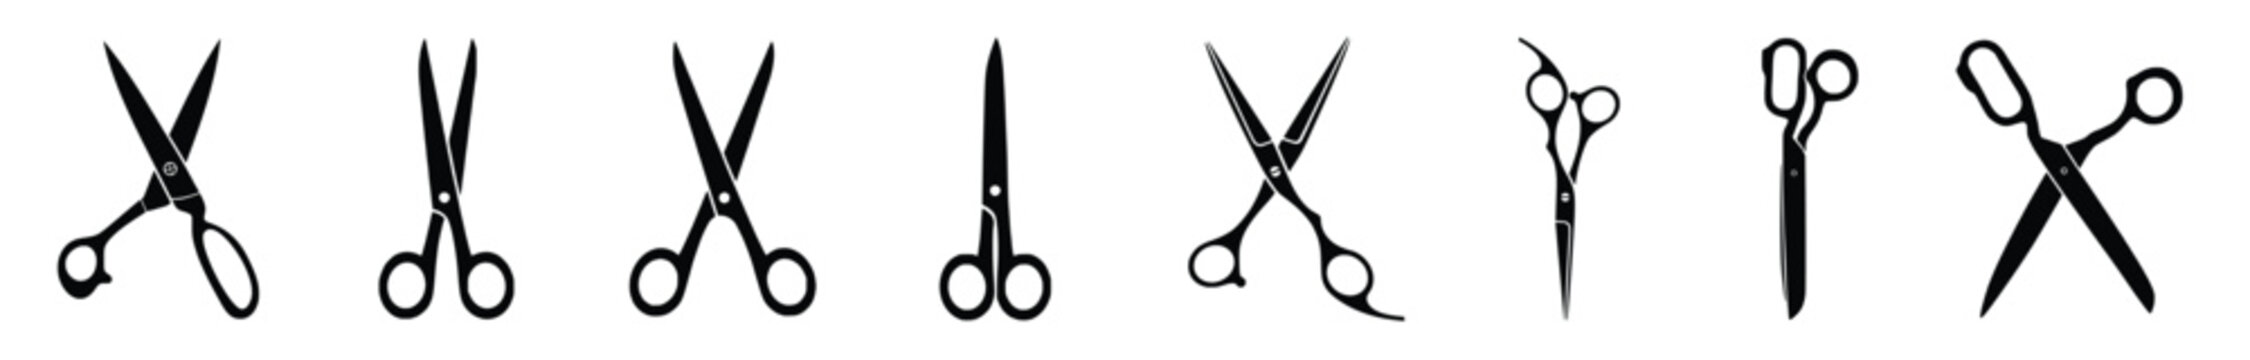 Vector illustration of a scissors set collection isolated on white background.